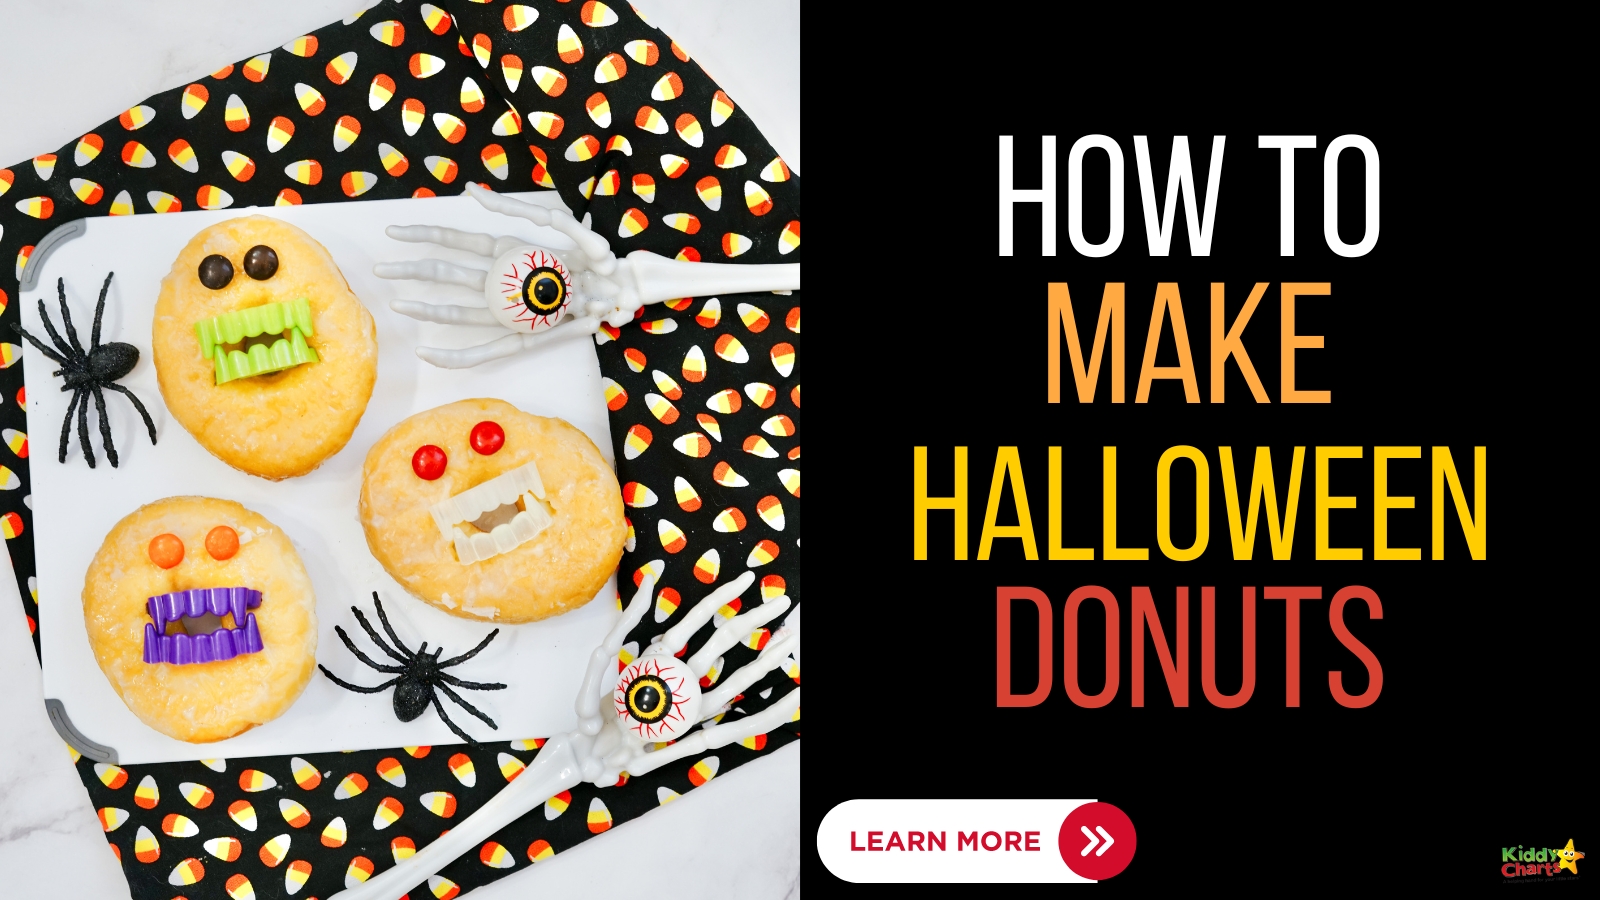 Spooky Halloween Donuts: A fun &amp; educational kitchen adventure!